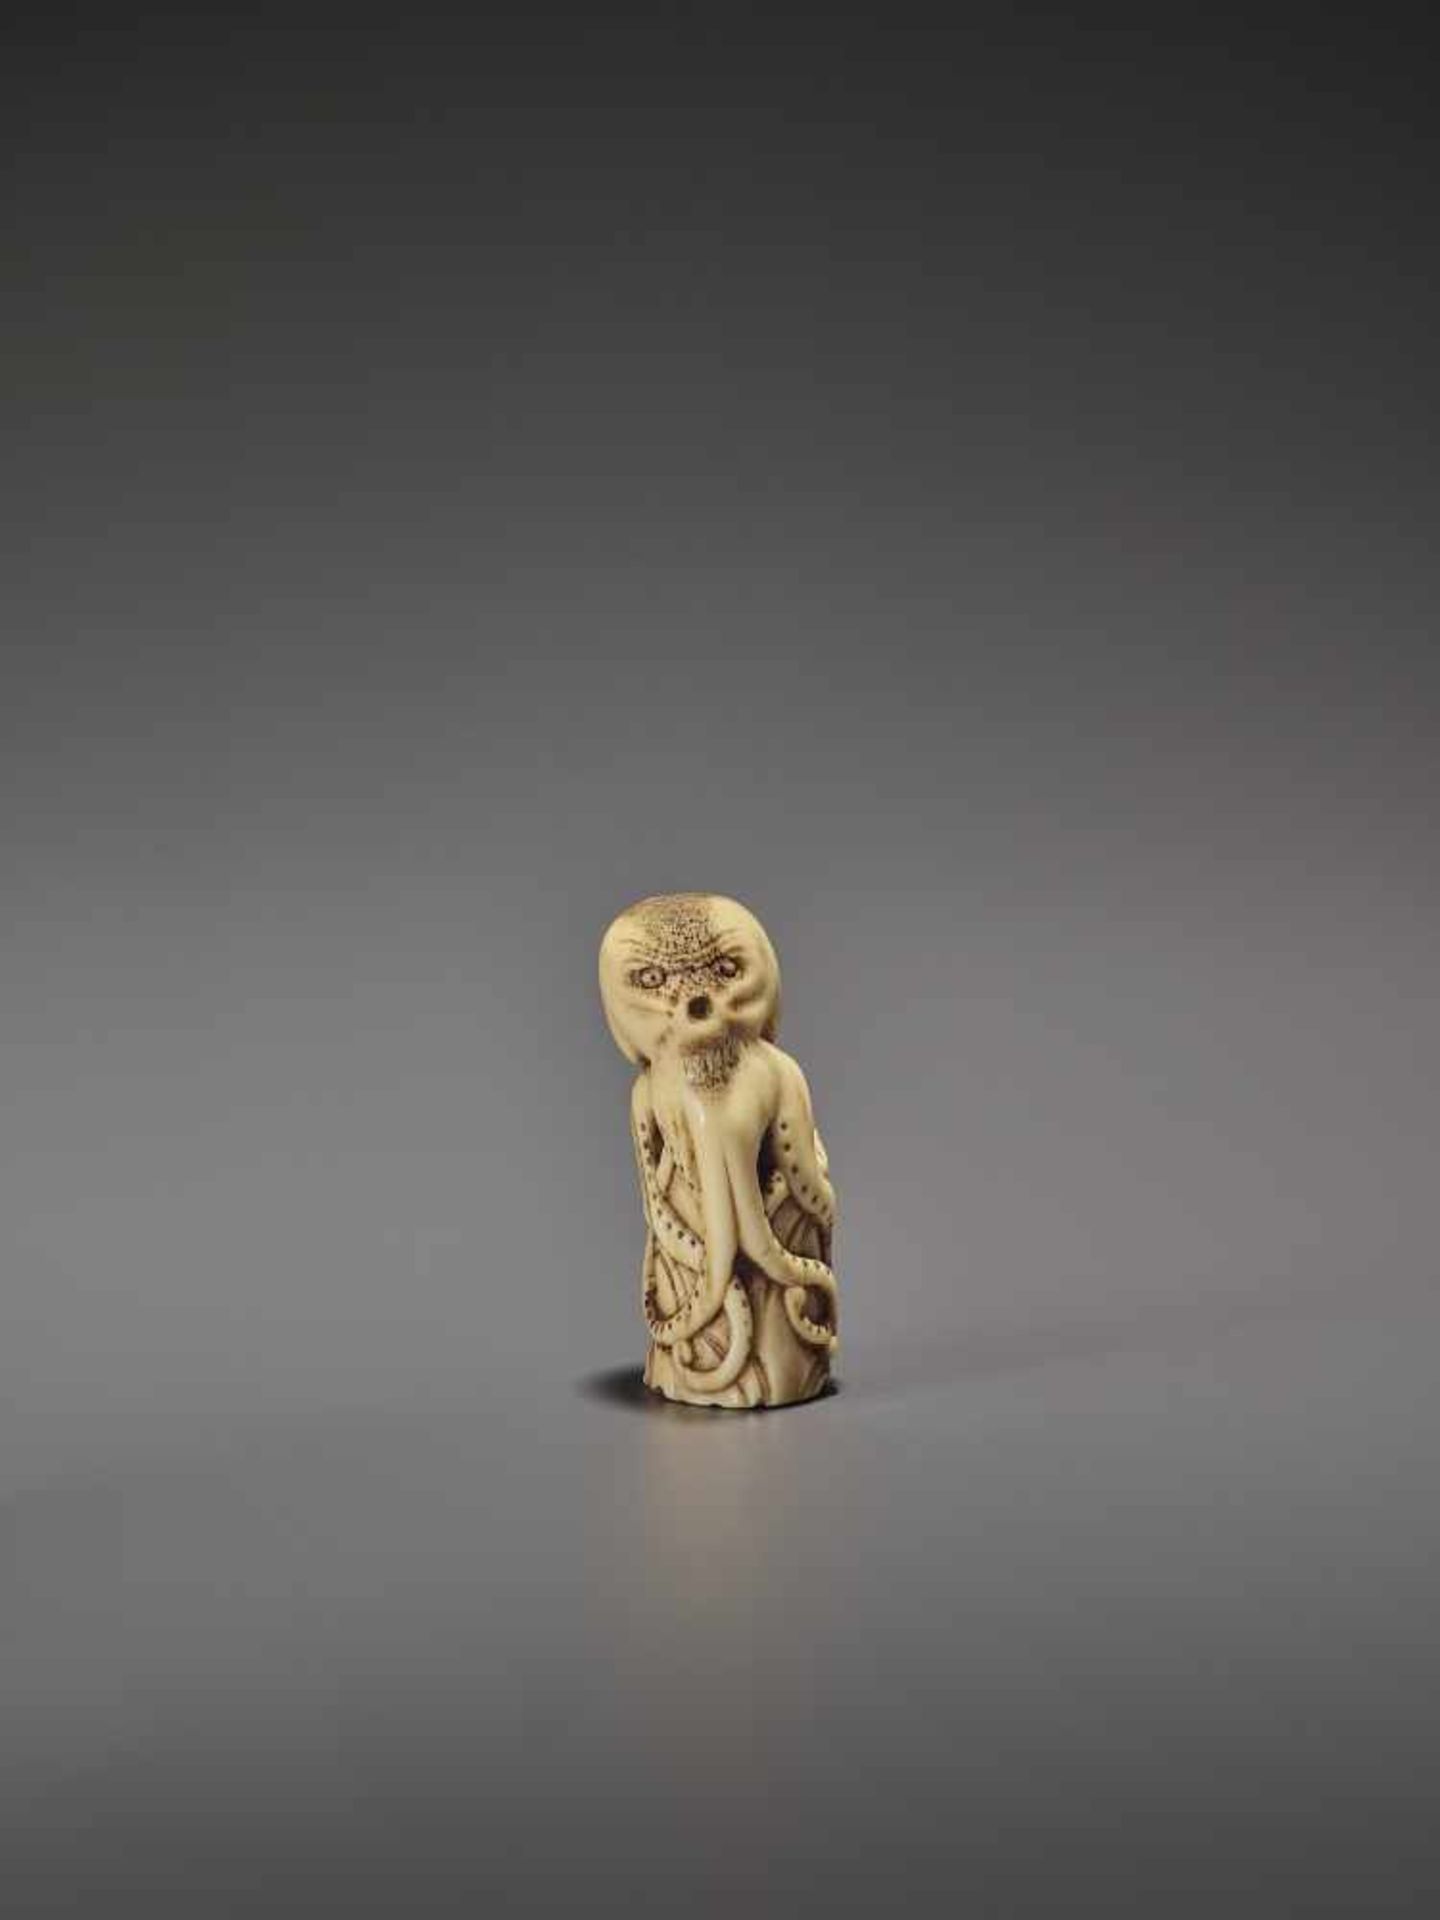 A RARE STAG ANTLER NETSUKE OF AN OCTOPUS UnsignedJapan, early 19th century, Edo period (1615-1868) - Image 8 of 10